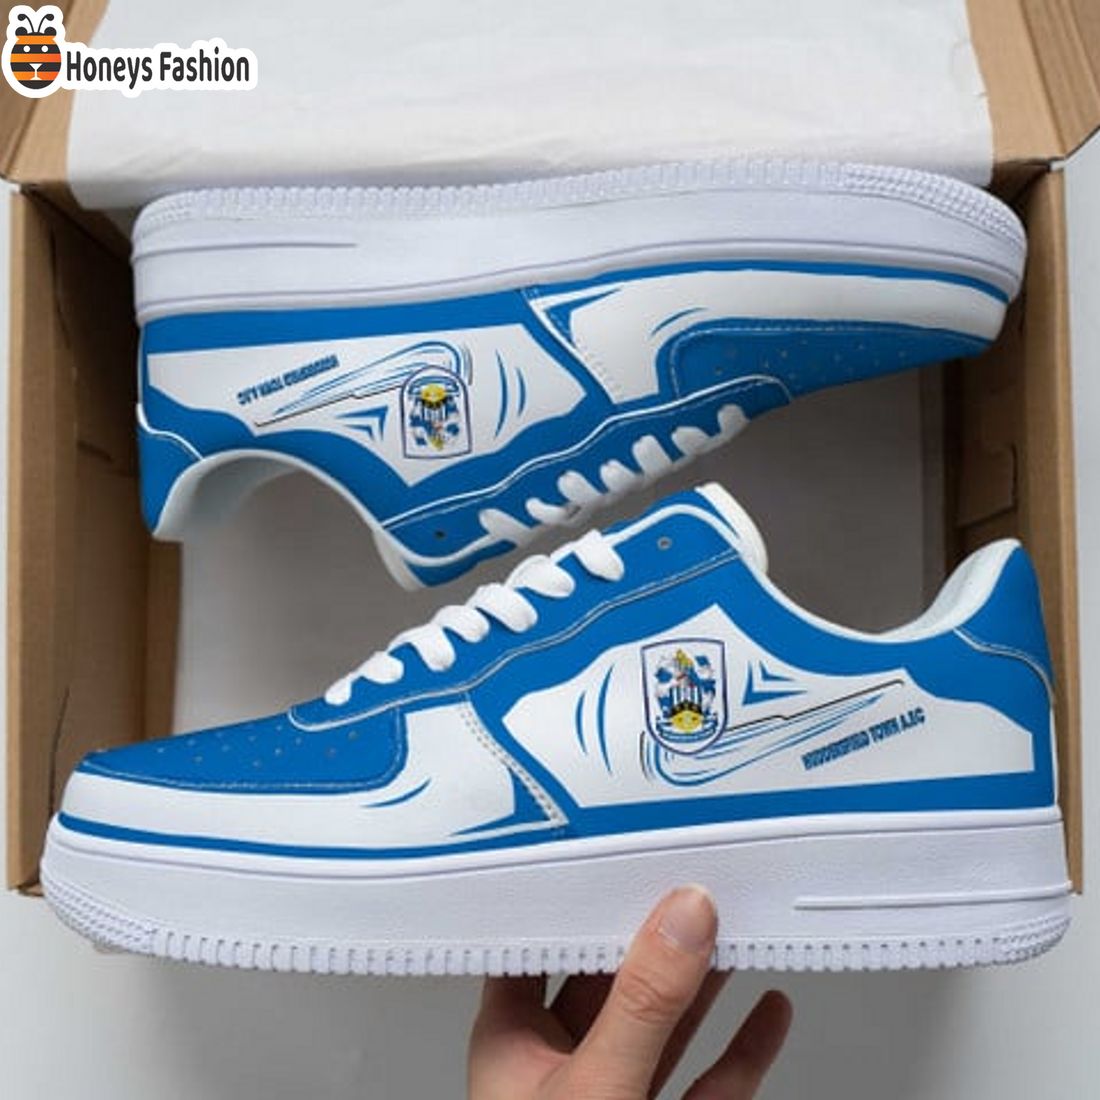 TRENDING Huddersfield Town A.FC EFL Championship Nike Air Force 1 Sneakers